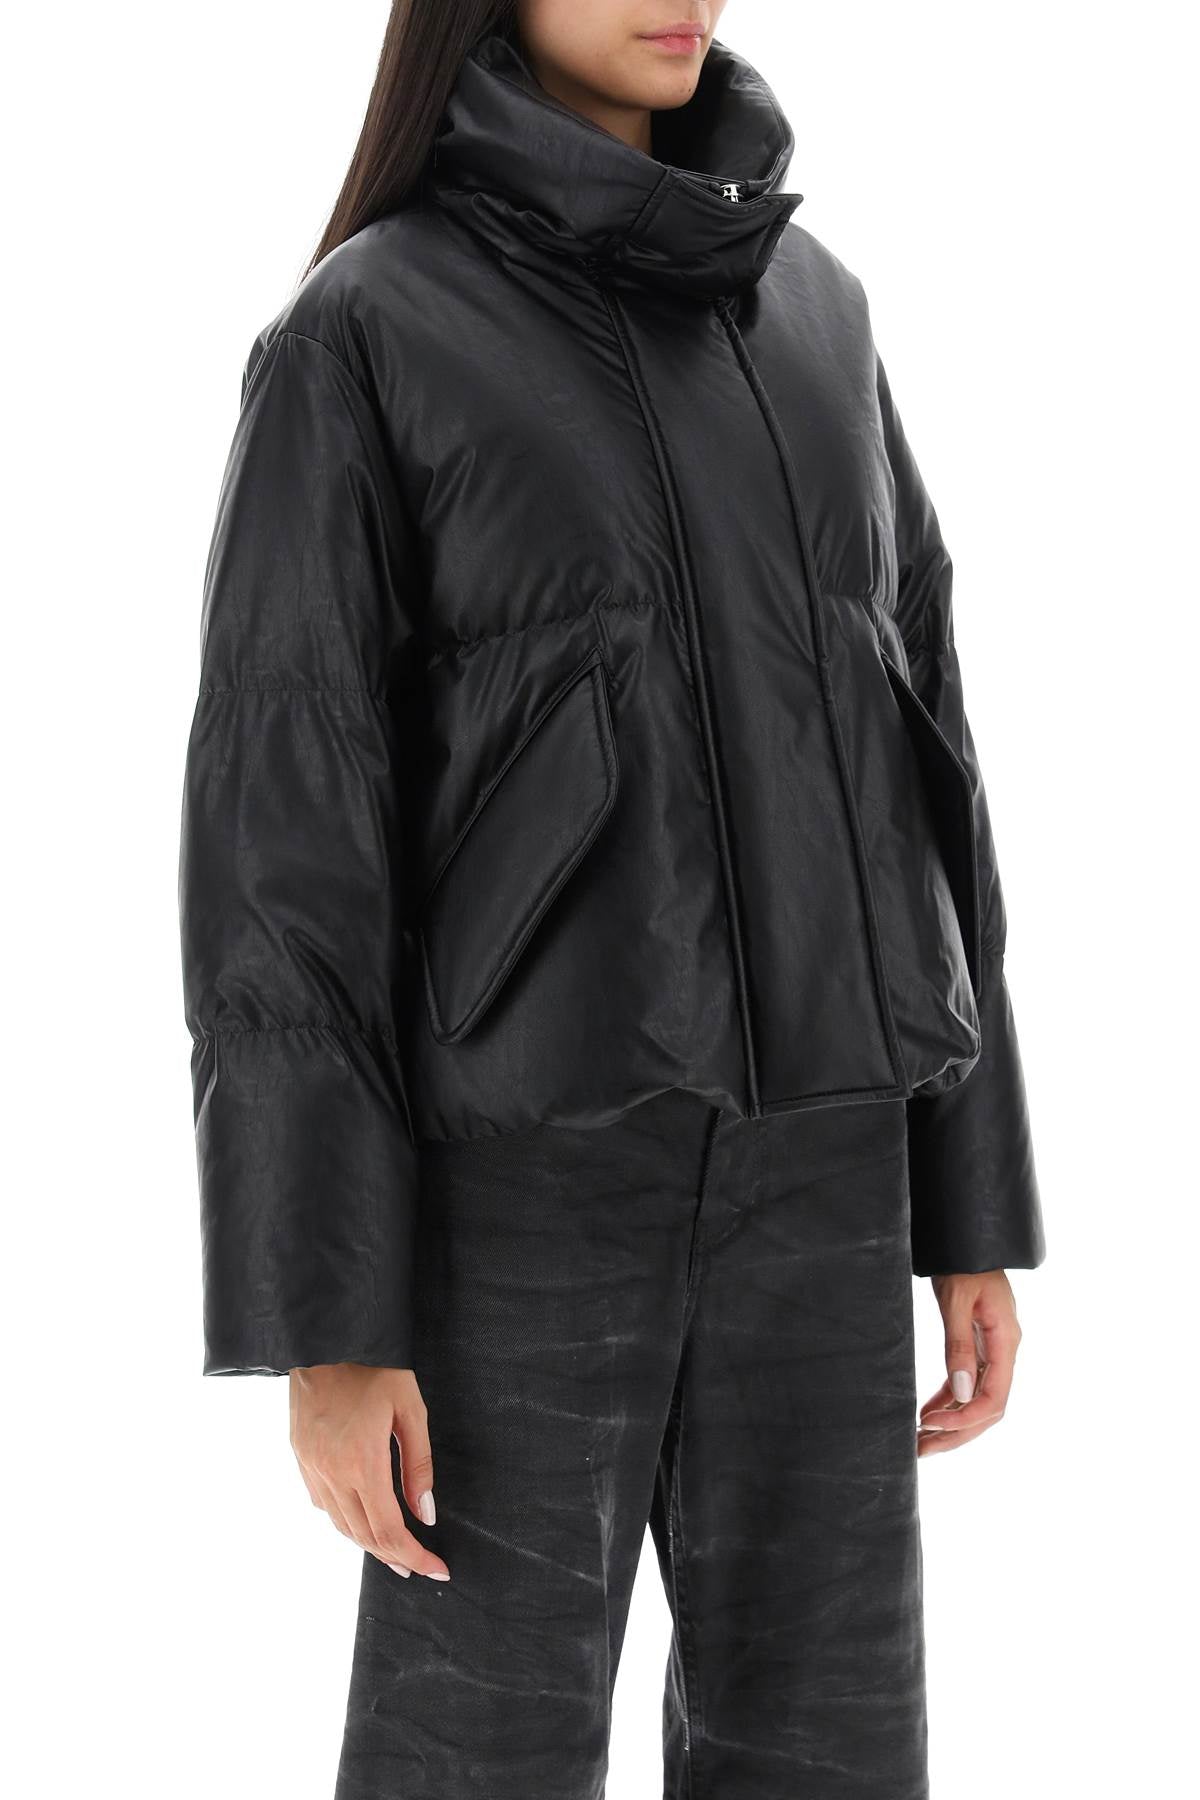 MM6 MAISON MARGIELA Faux Leather Puffer Jacket with Back Logo Embroidered